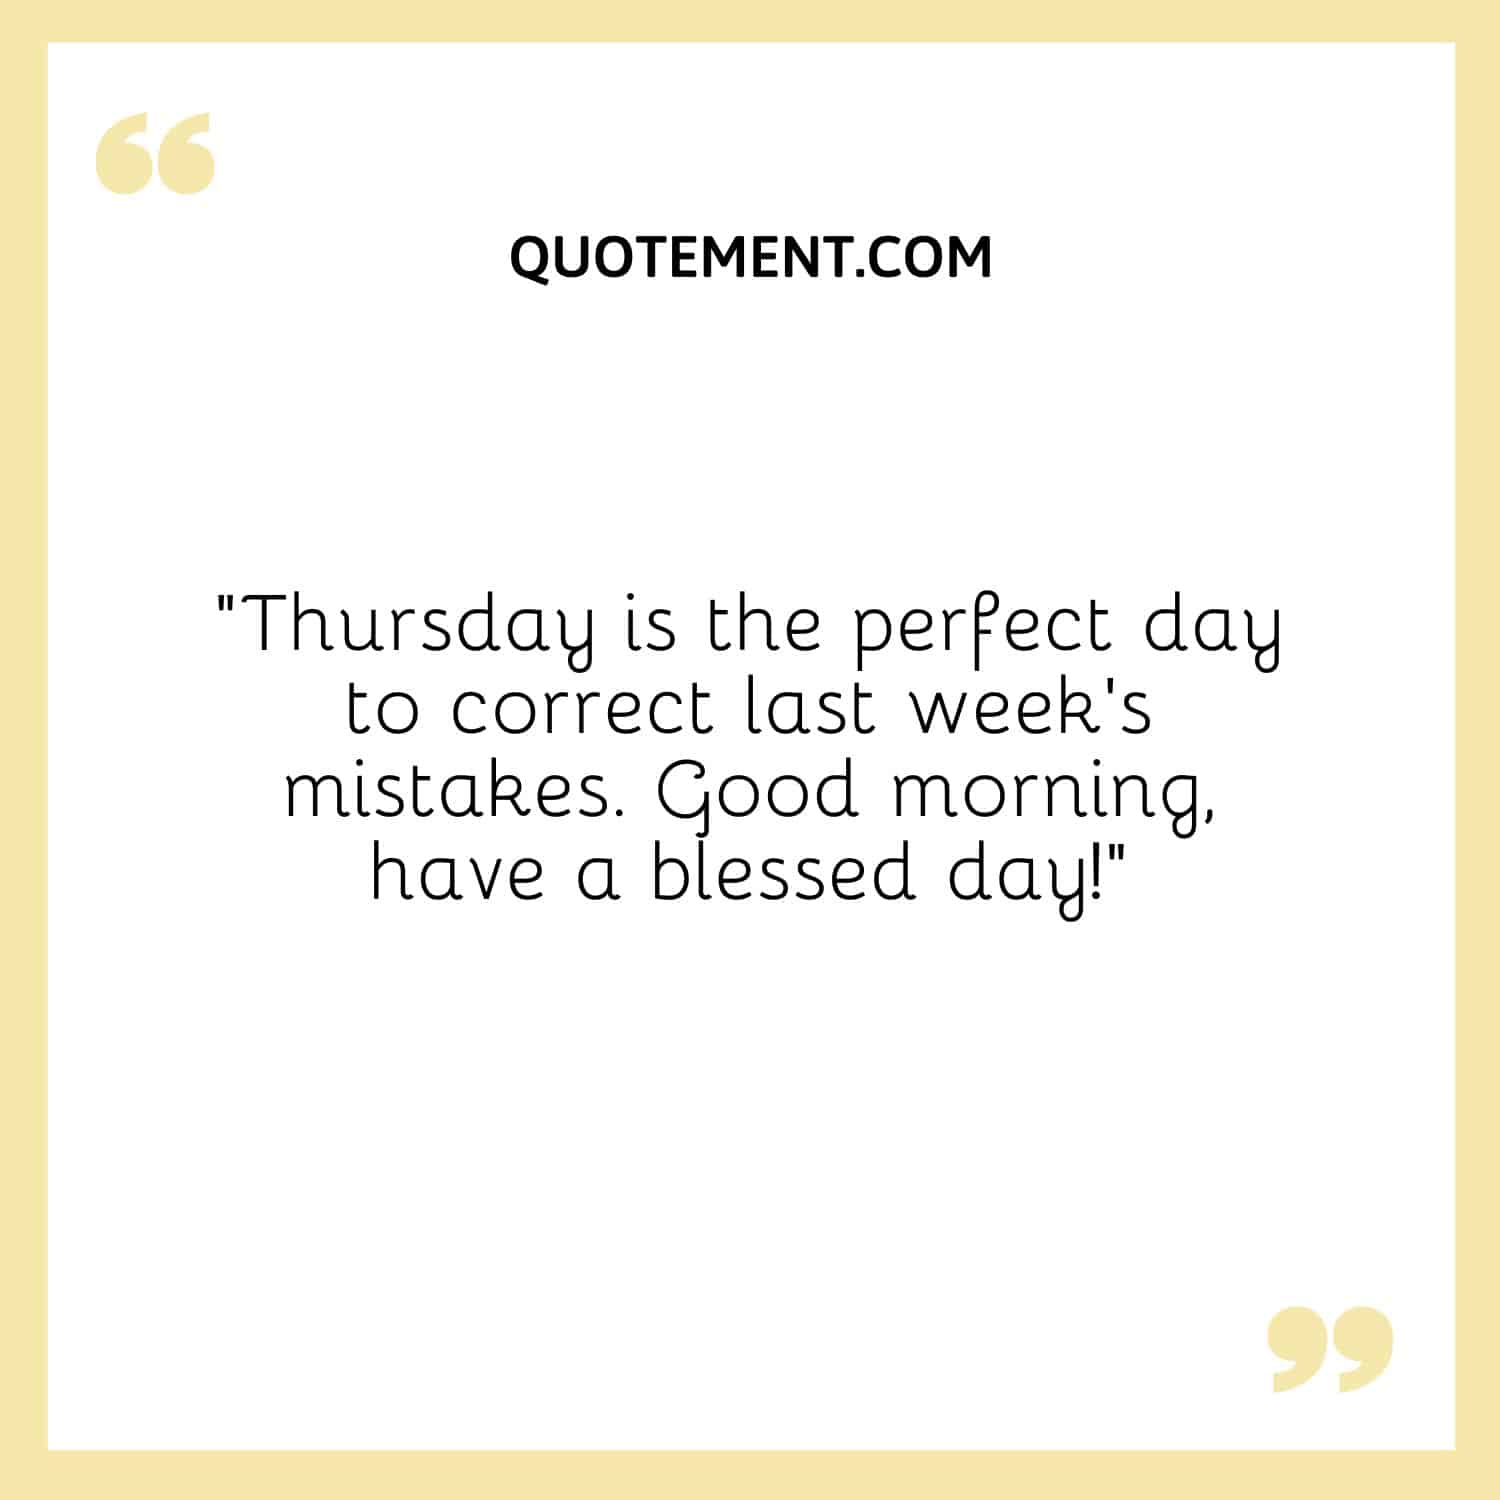 “Thursday is the perfect day to correct last week’s mistakes. Good morning, have a blessed day!”